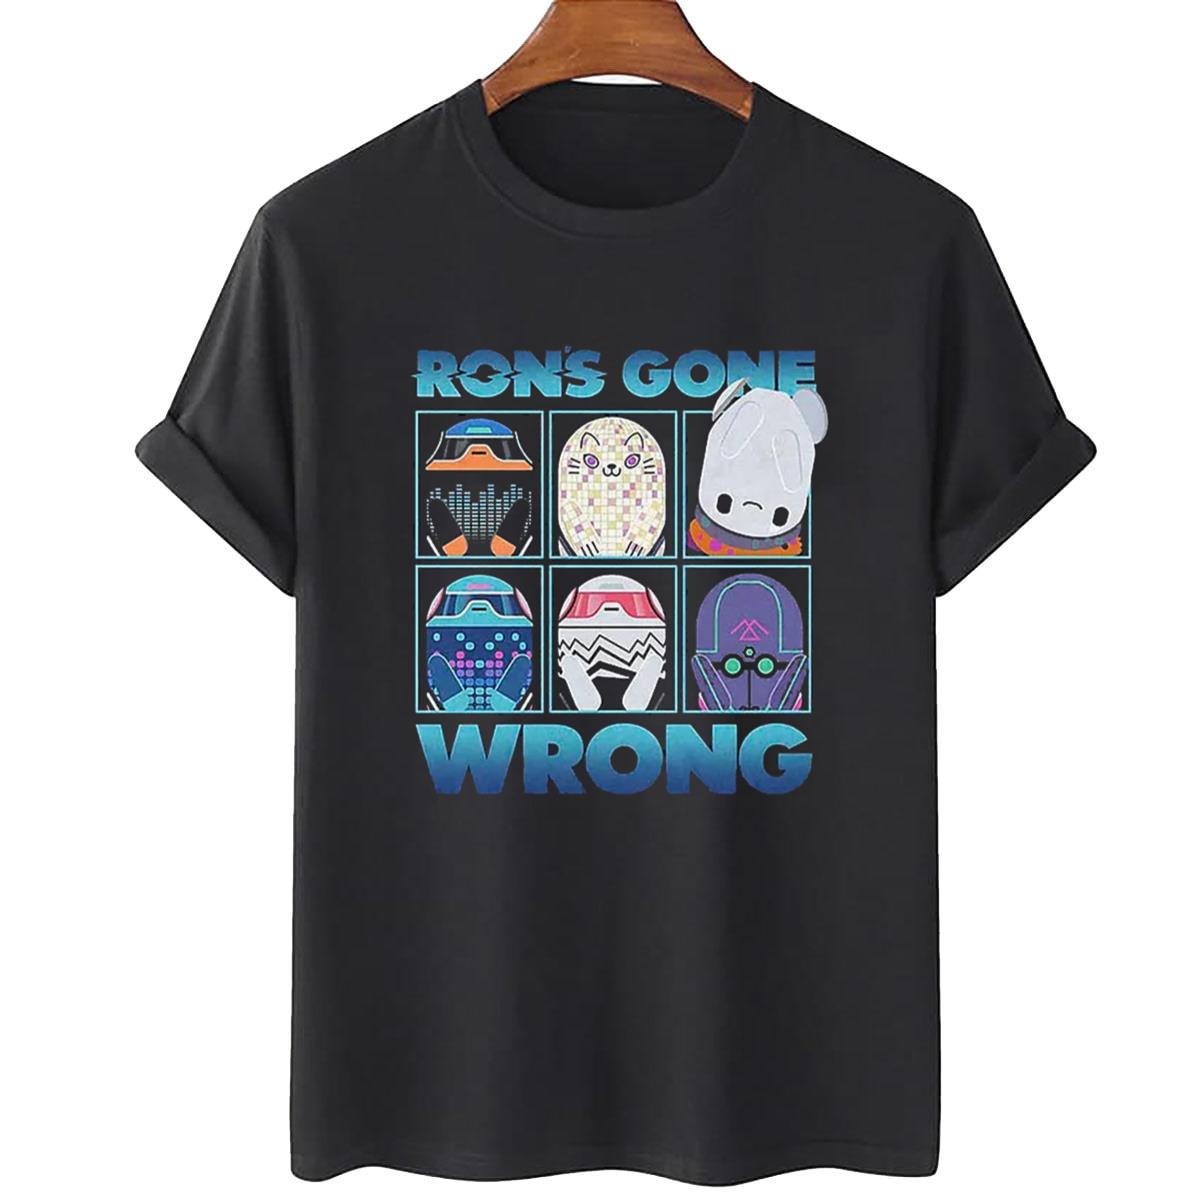 The Best Ron’s Gone Wrong T-shirt For gift